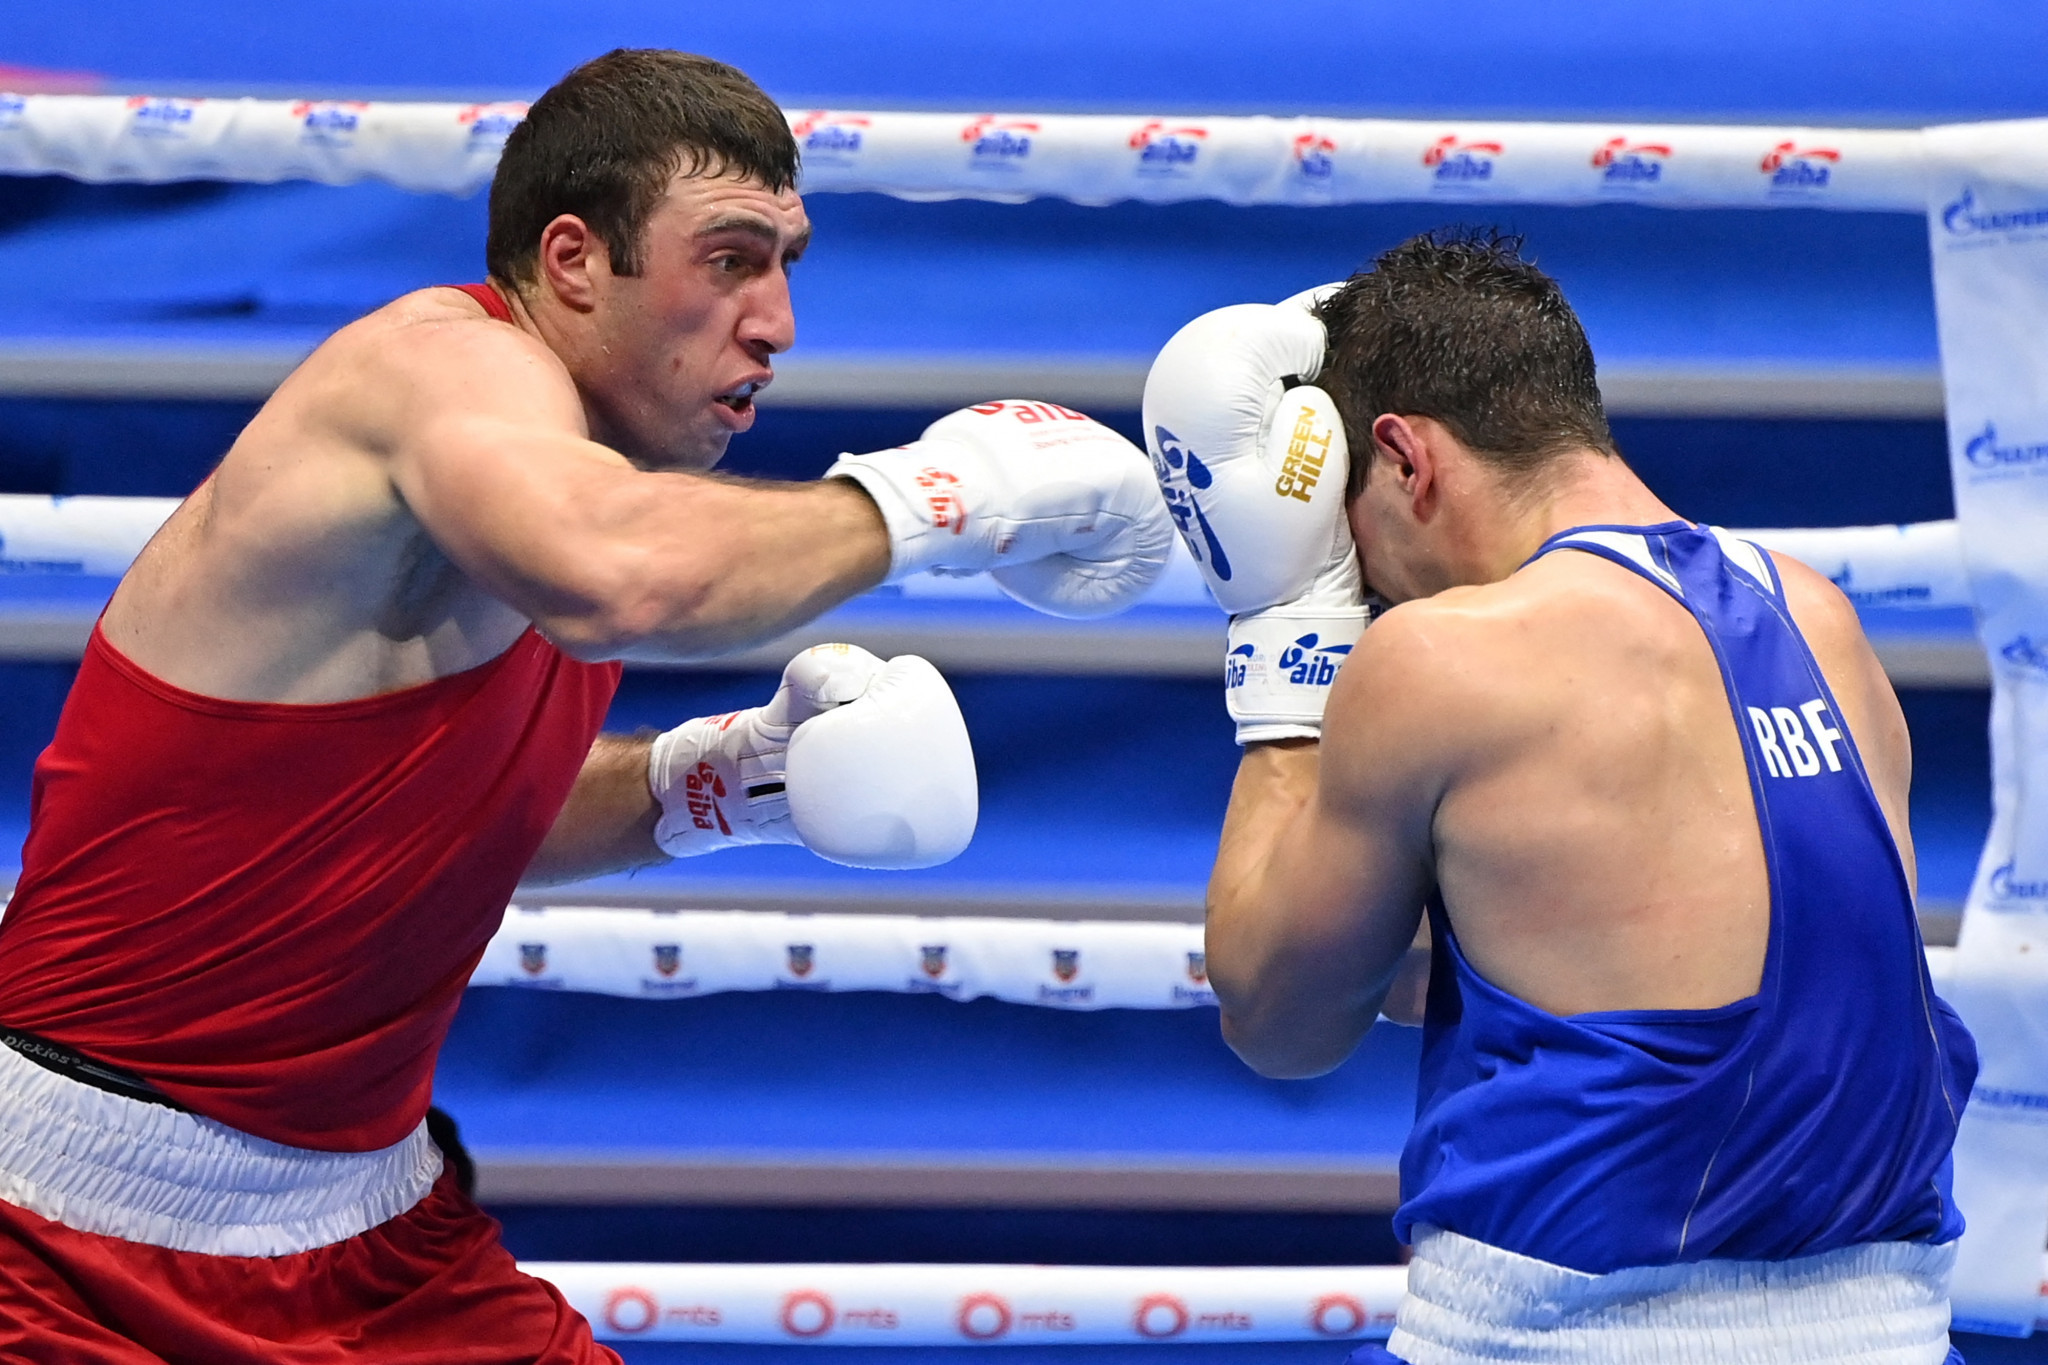 Bottle-throwing protests over TKO decision for home super-heavyweight at European Boxing Championships in Armenia